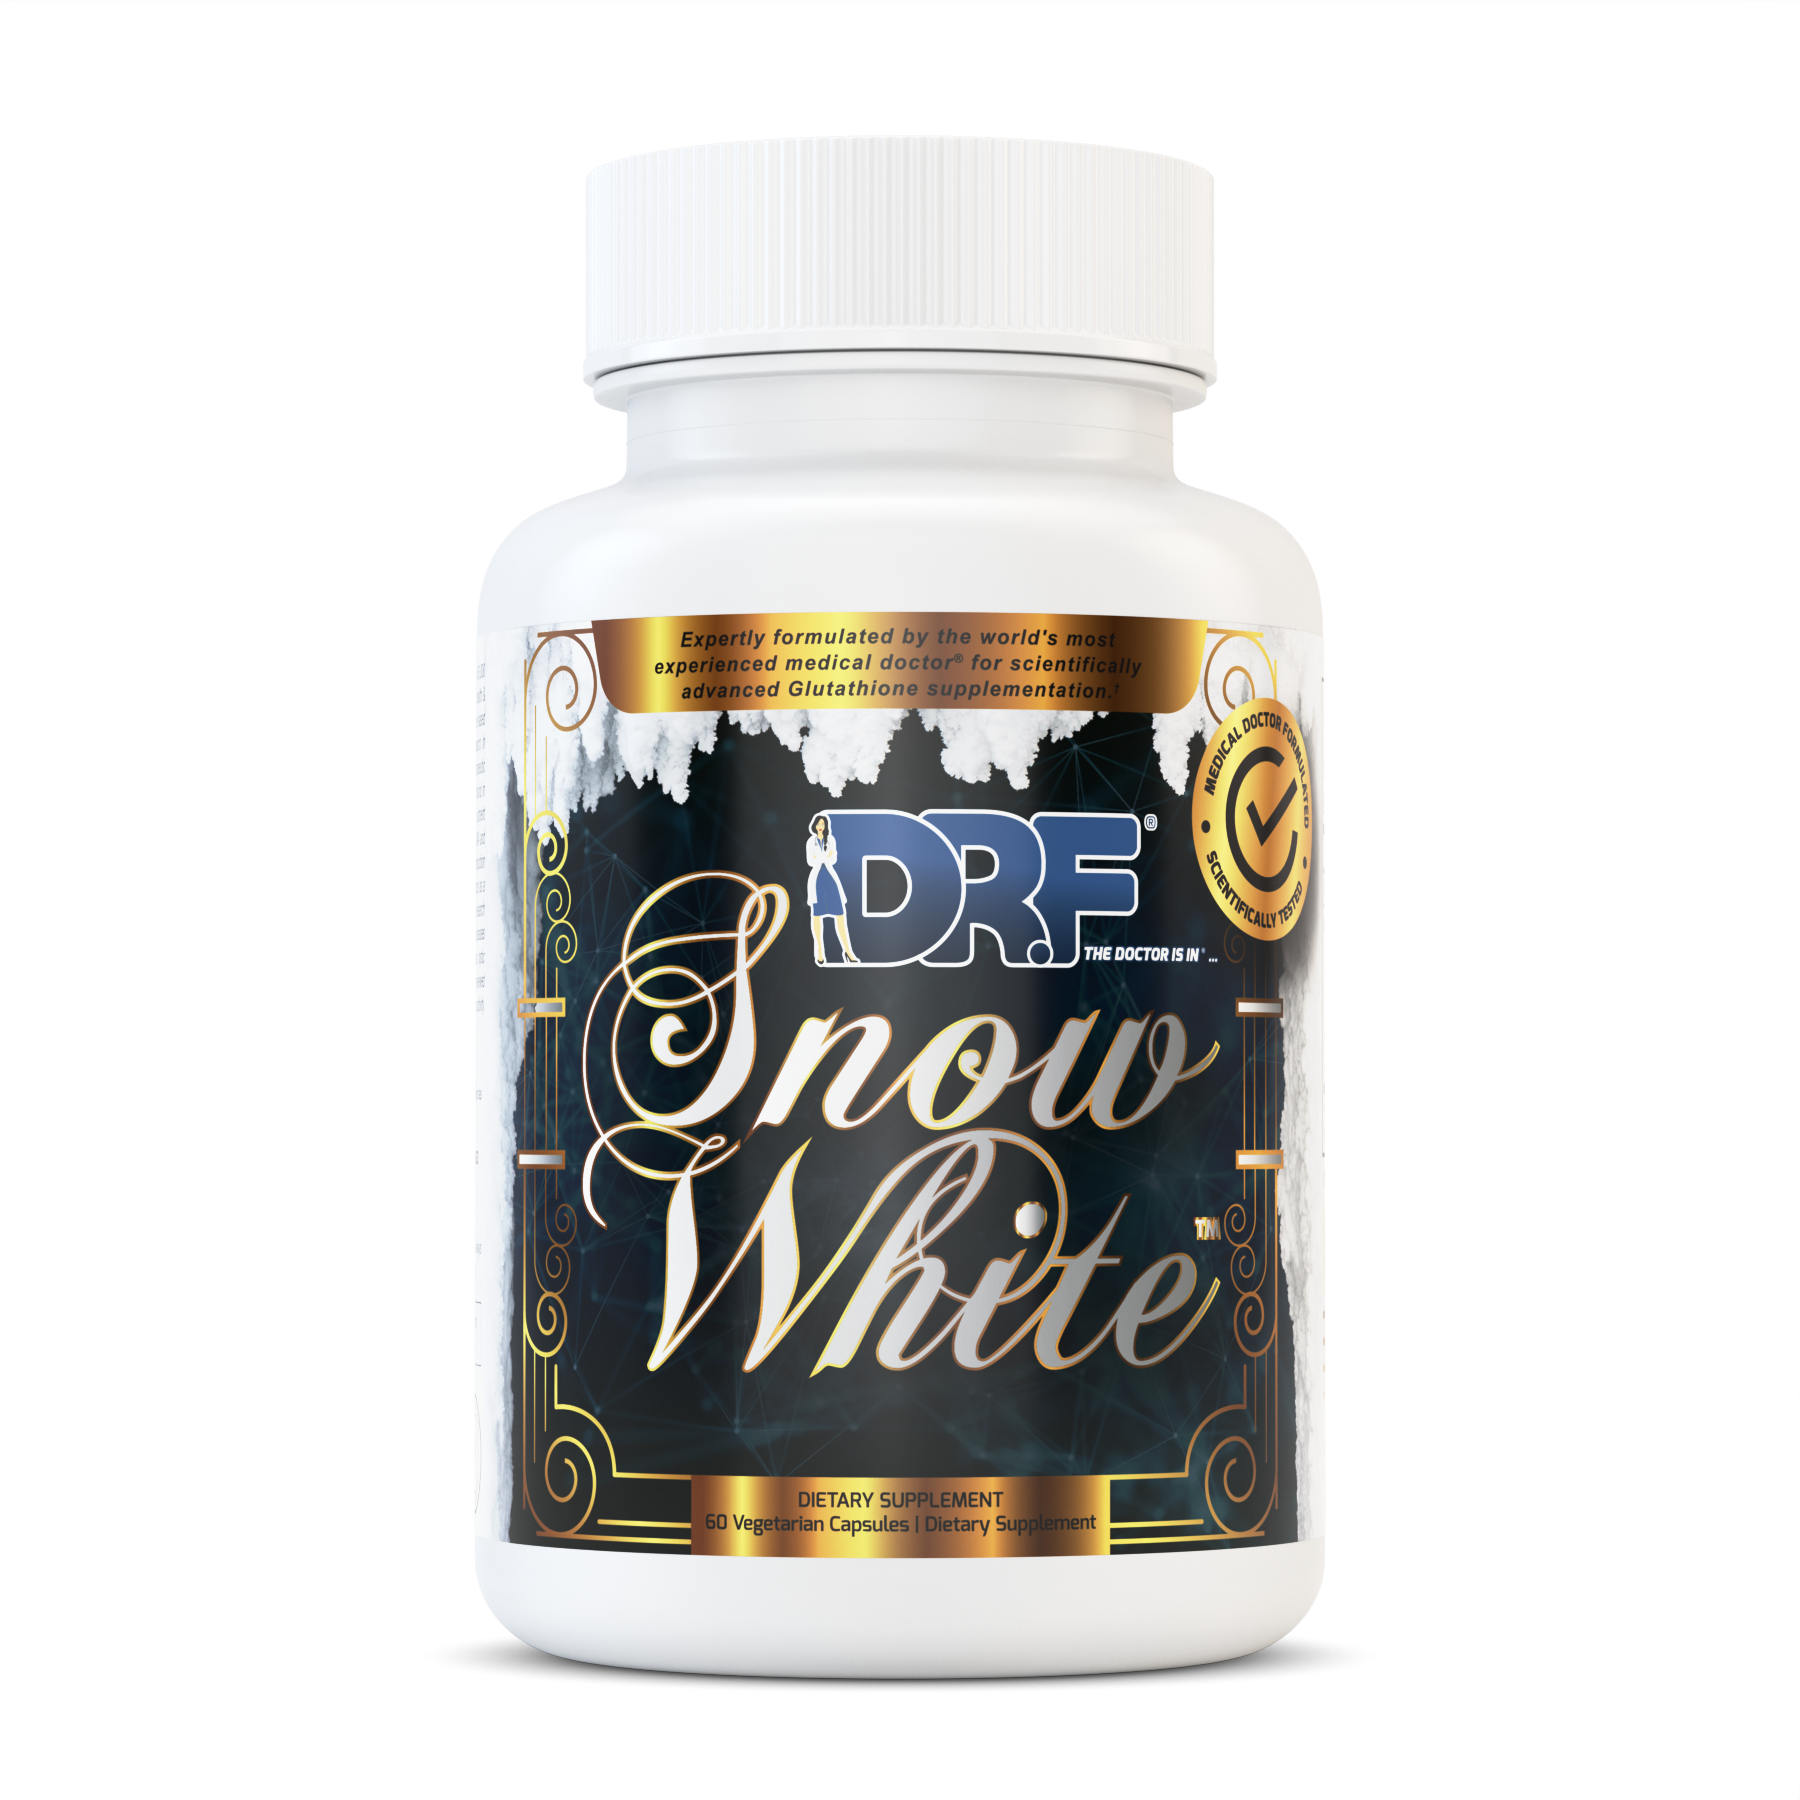 Dr. Farrah® - Snow White - CURRENTLY OUT OF STOCK - CHECK BACK SOON